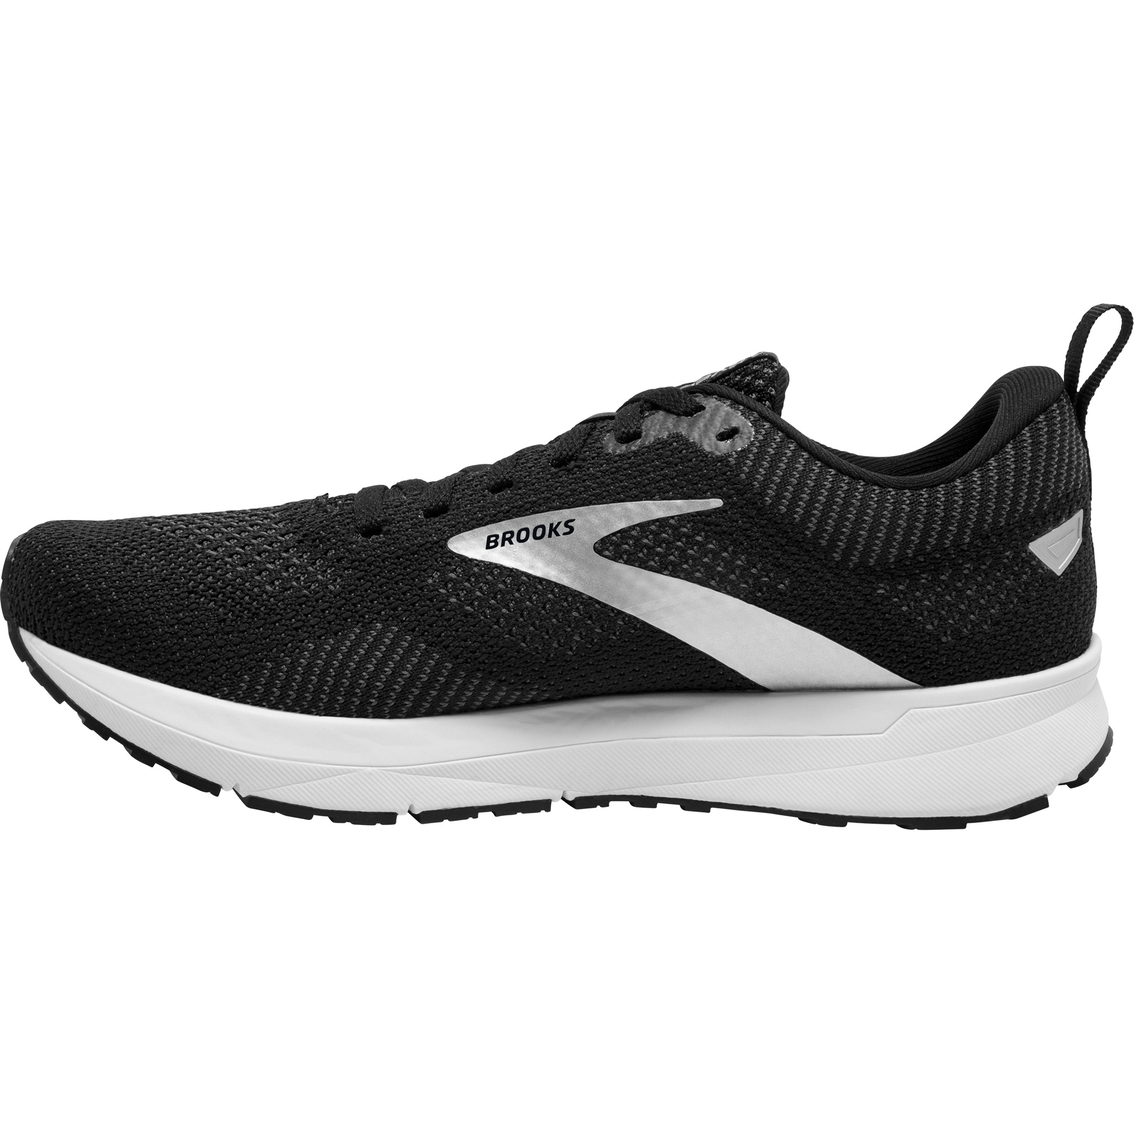 Brooks Women Revel 5 Running Shoes | Women's Athletic Shoes | Shoes ...